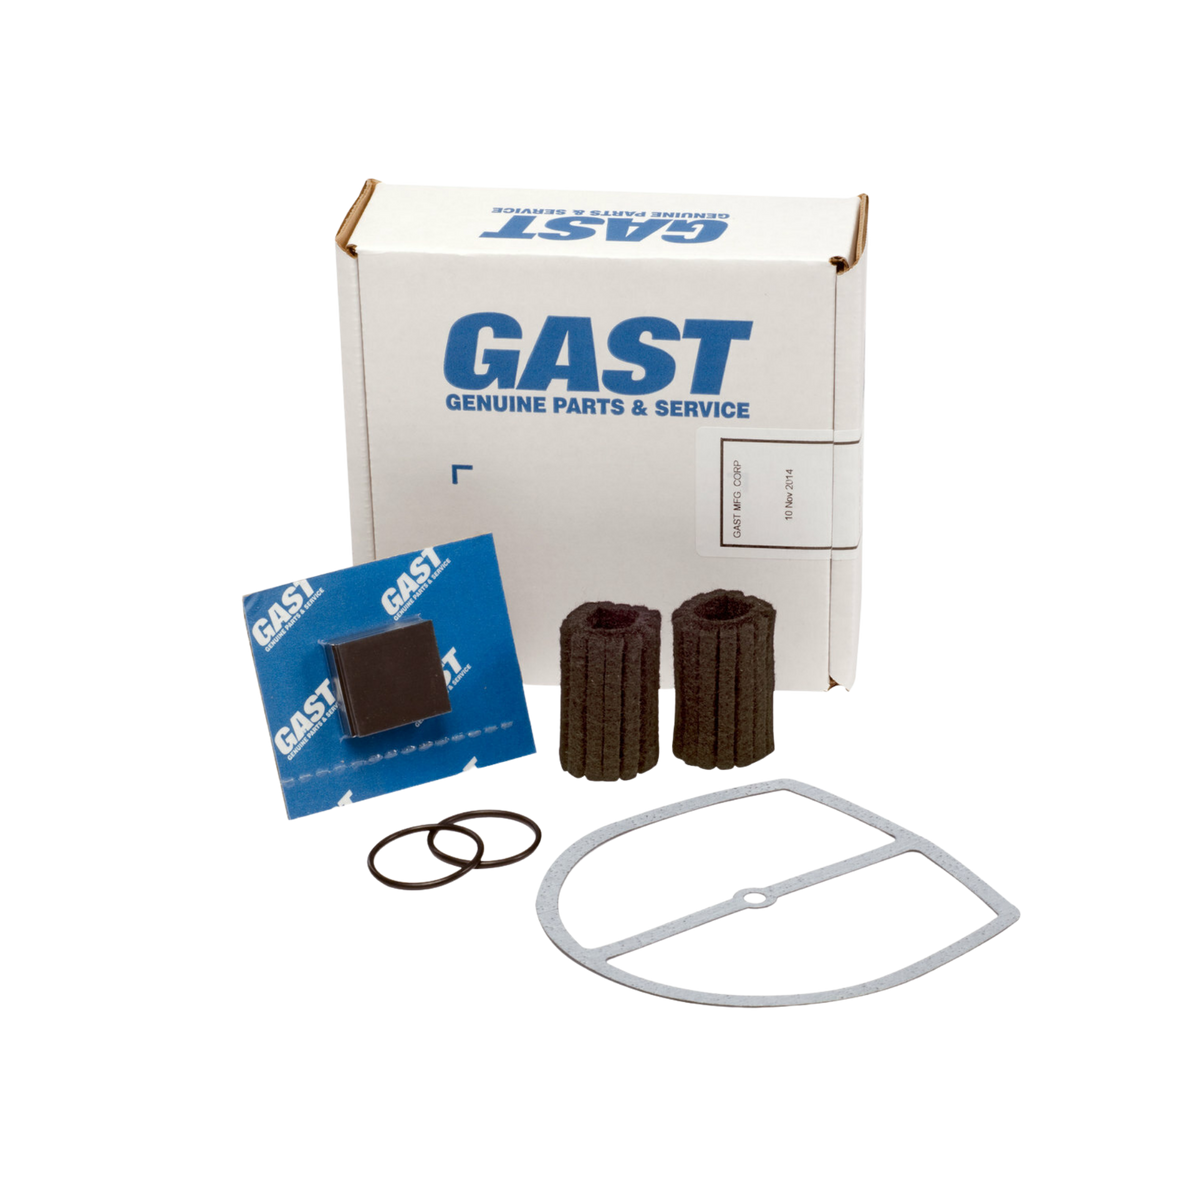 gaskets, o-ring, filters, piece of felt, and a white Gast box